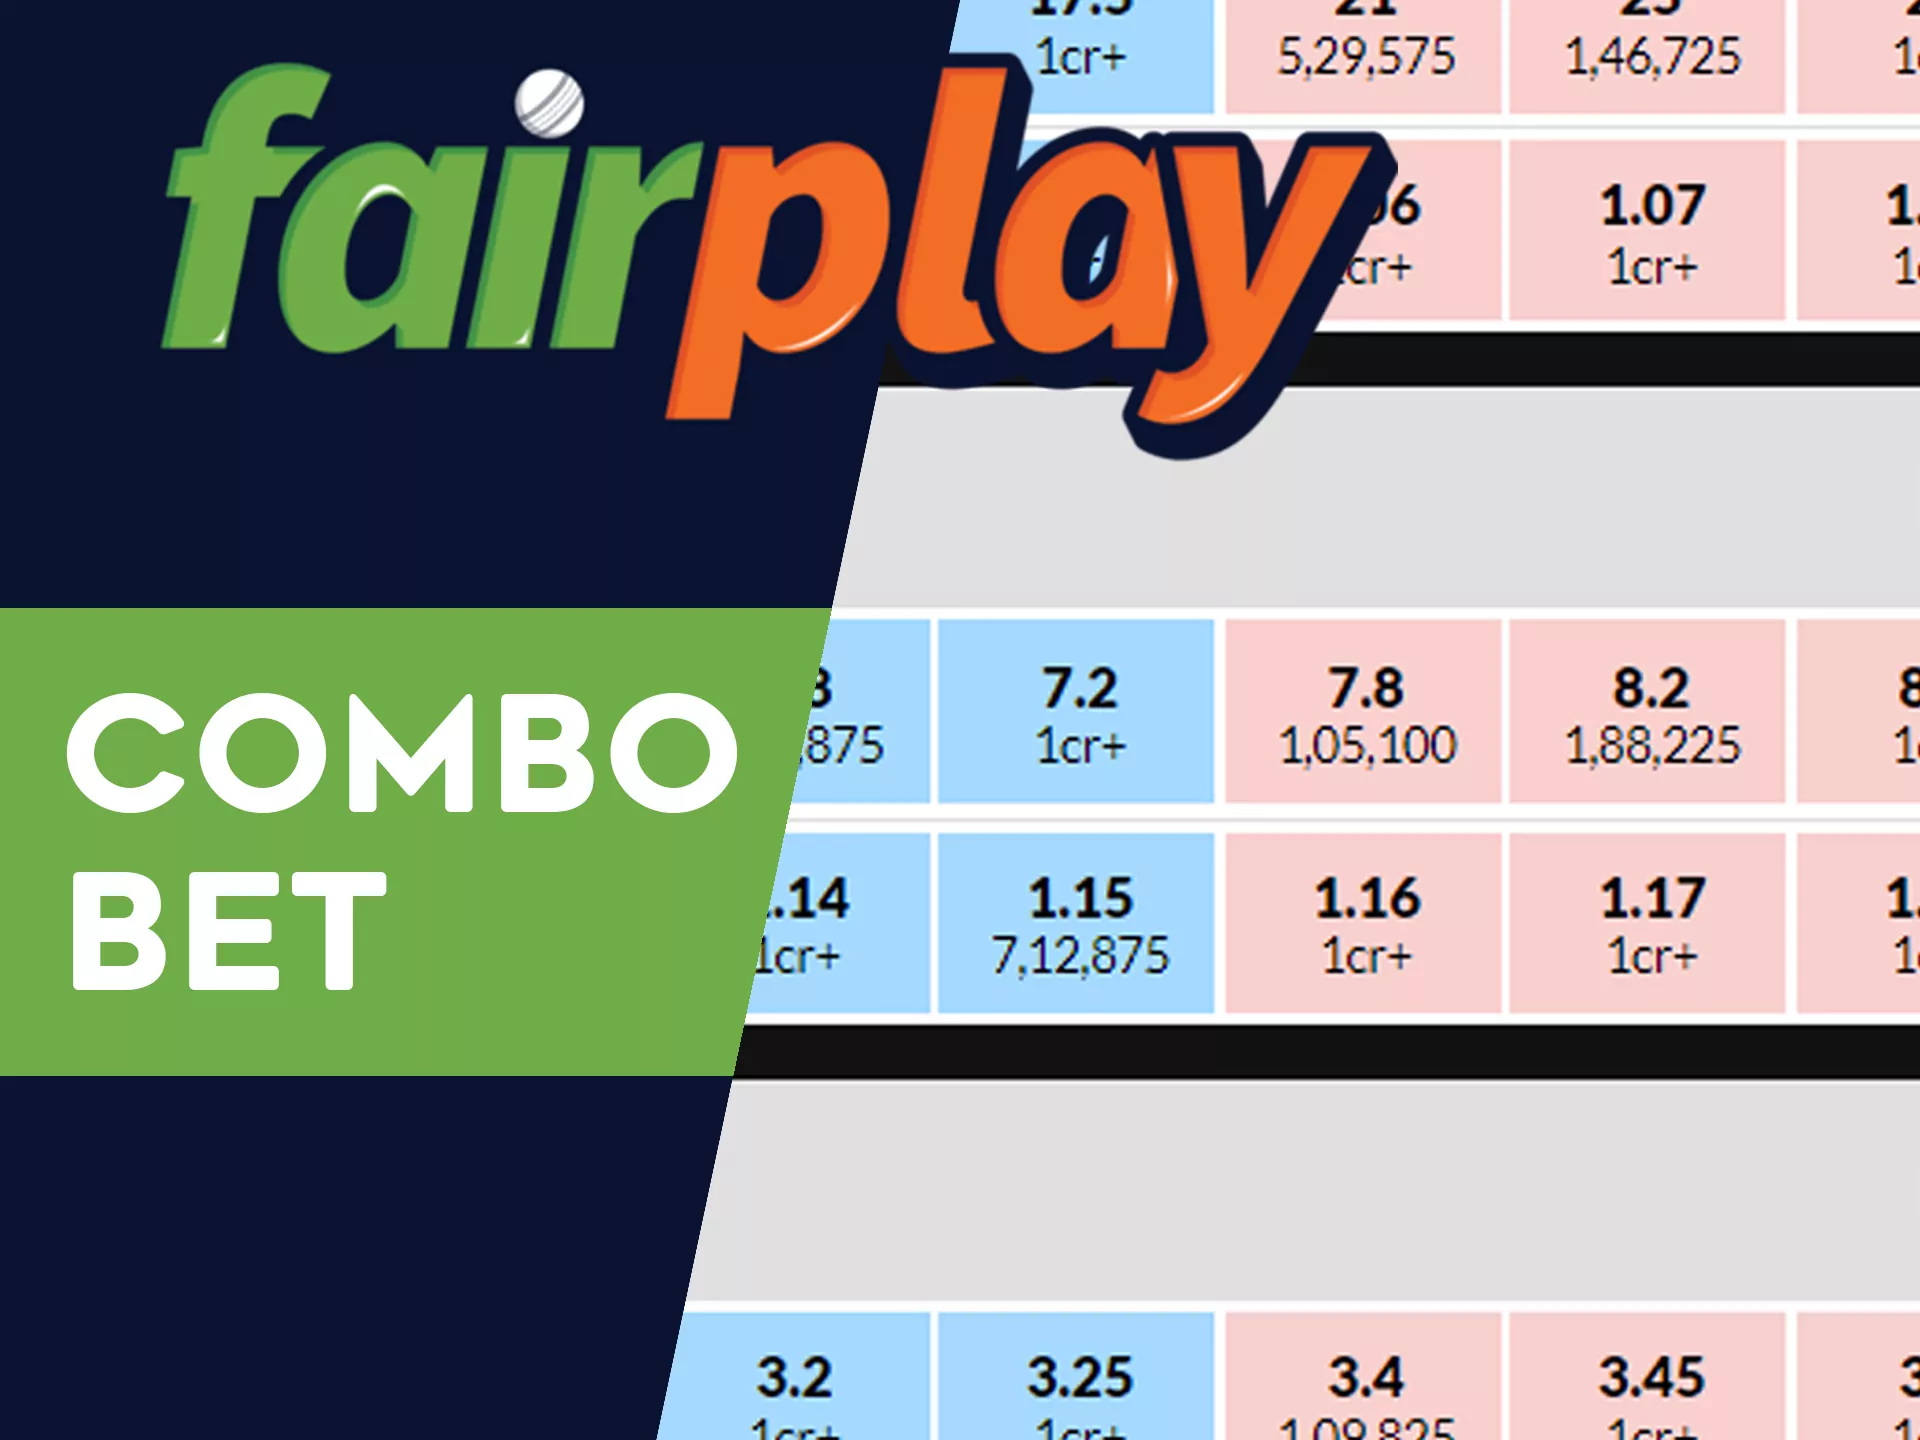 Place bets on several events at Fairplay.